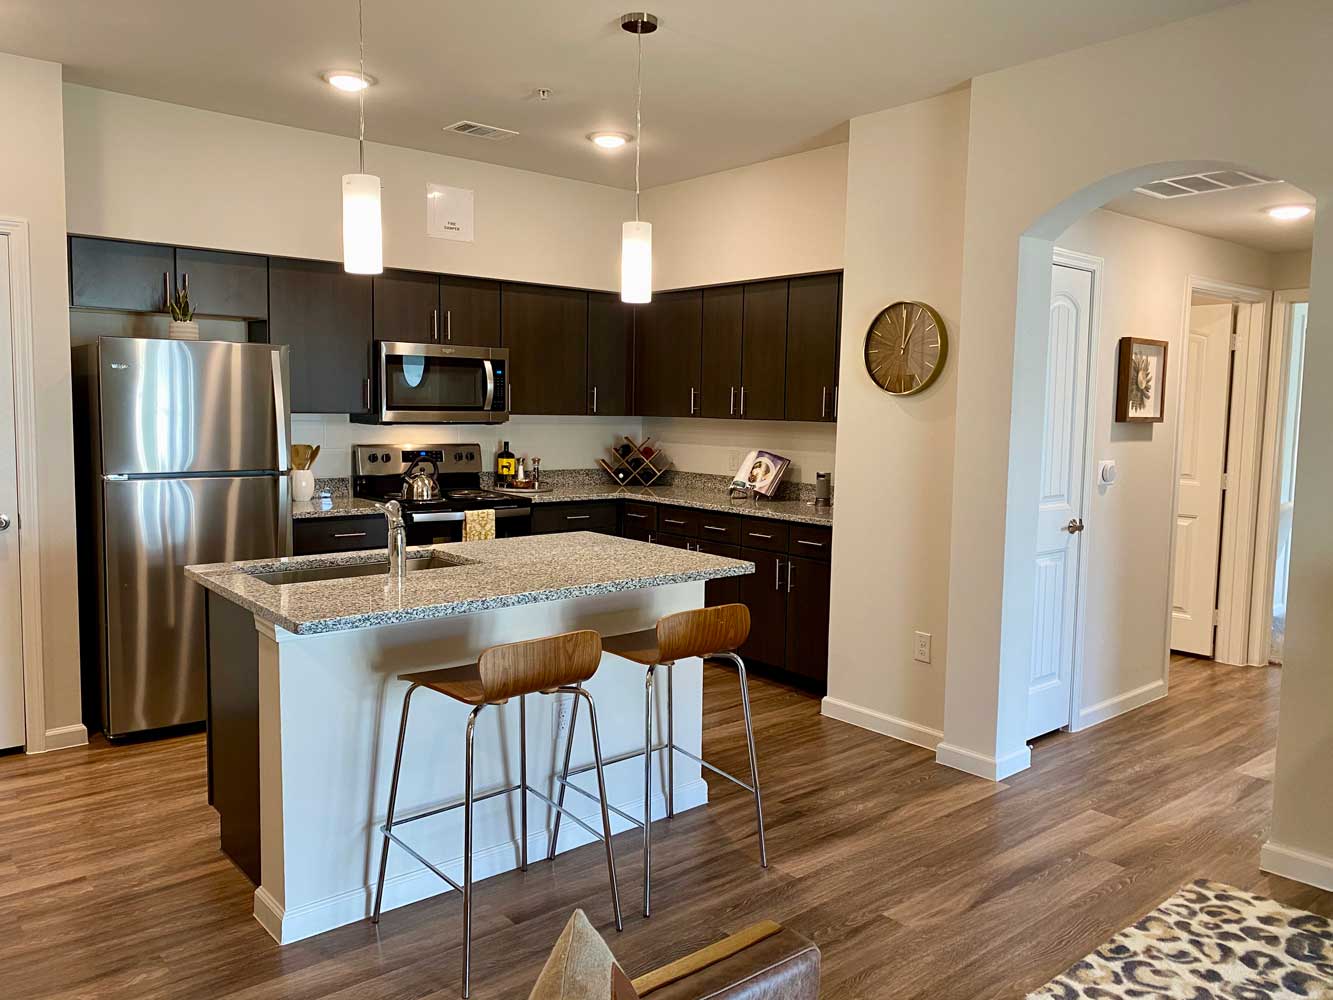 Fully Equipped Kitchen at Oxford at Santa Clara Apartments in Pflugerville, Texas